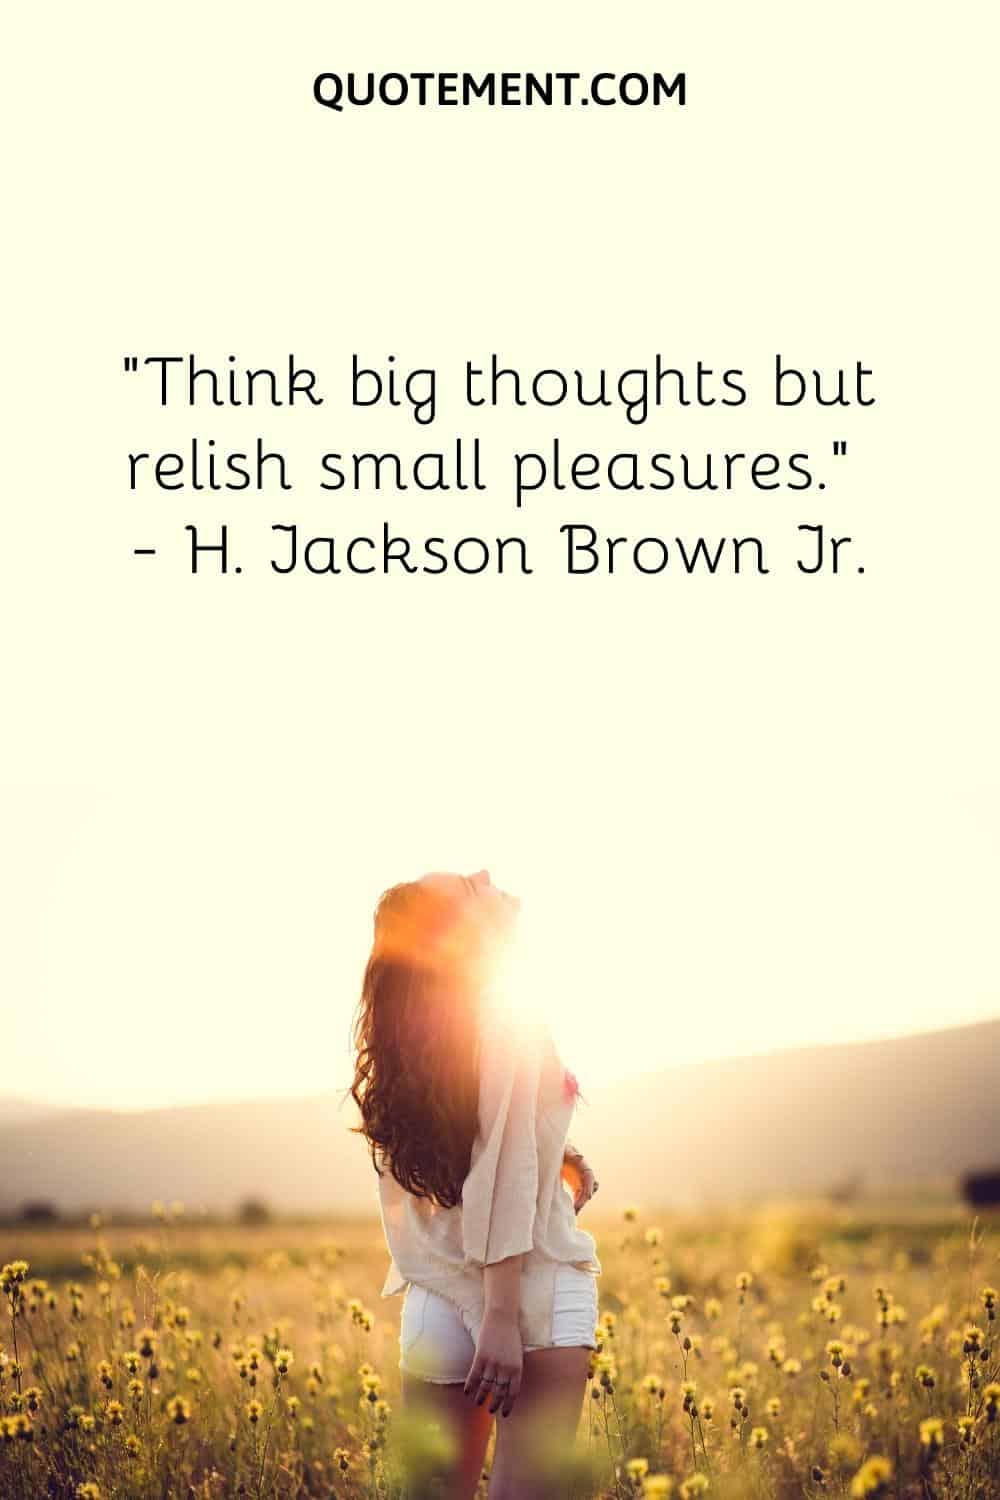 Think big thoughts but relish small pleasures